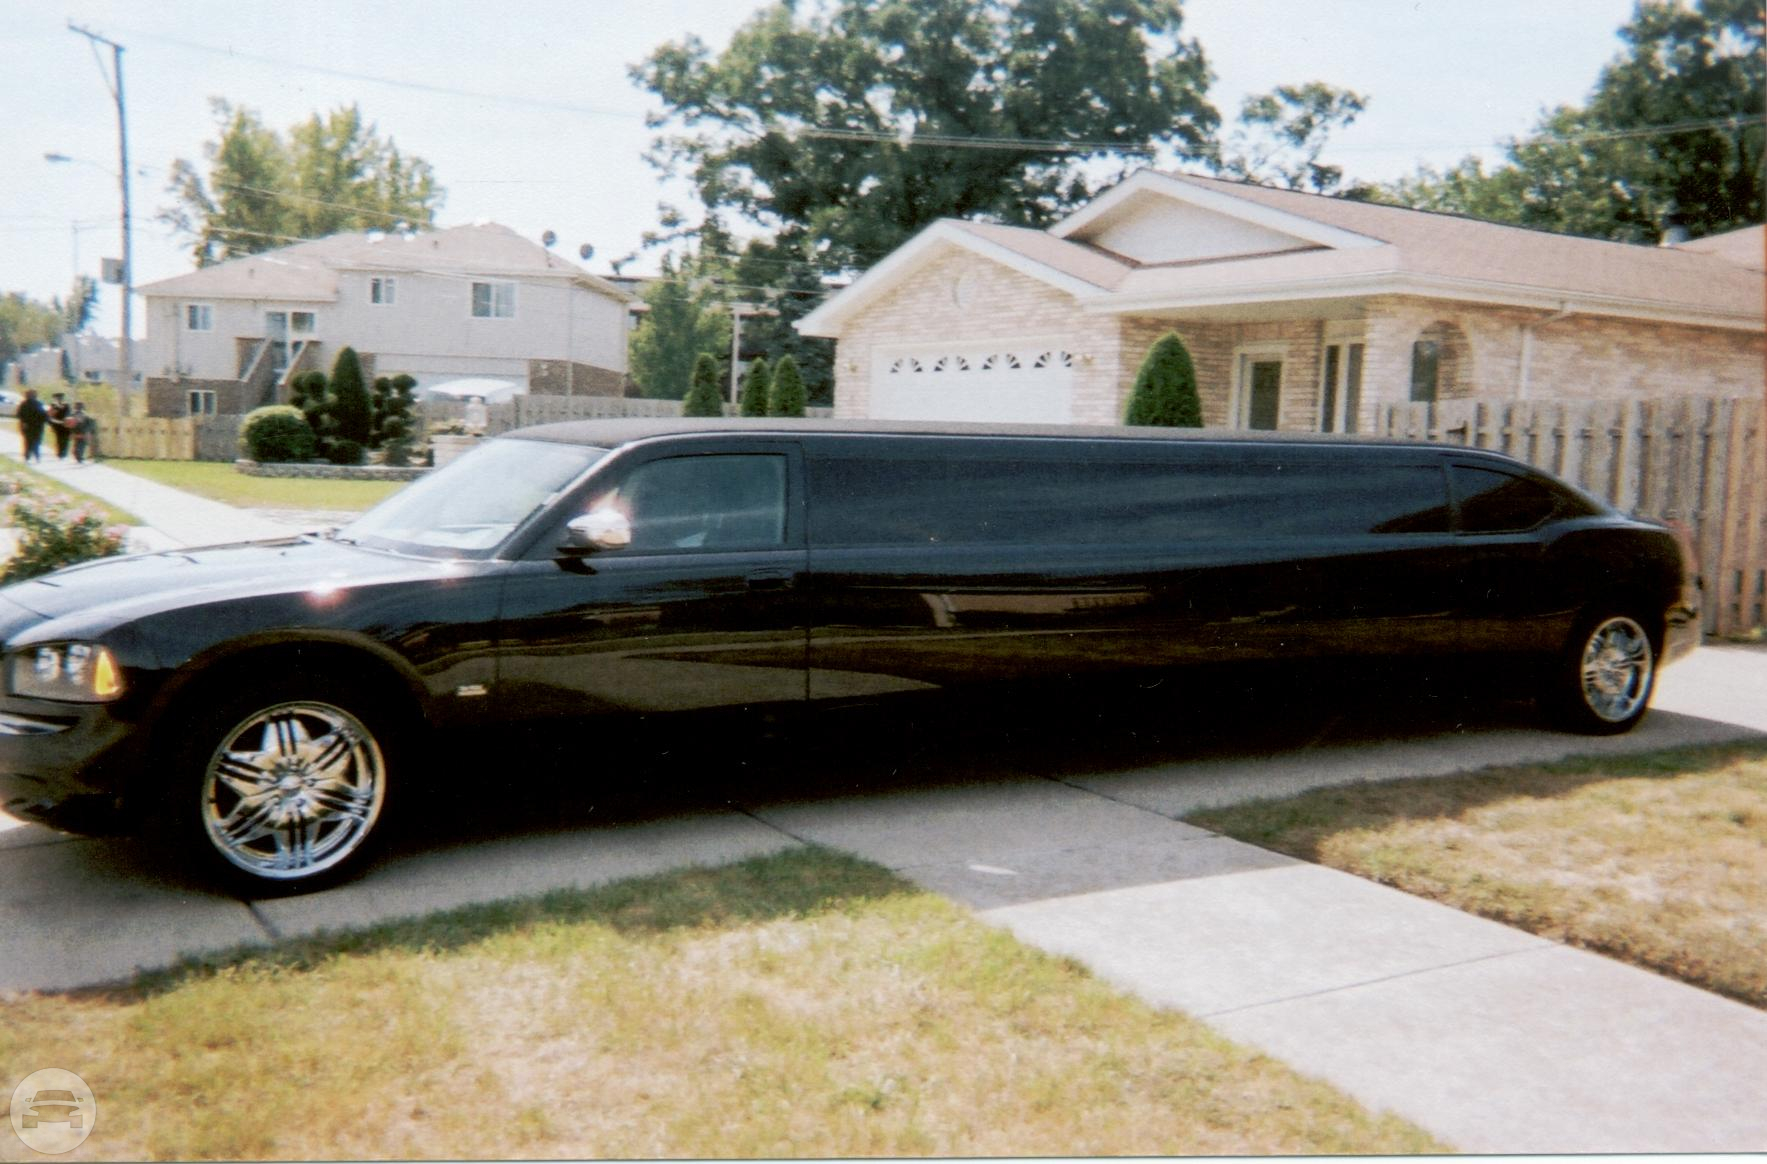 Chrysler 300 Stretch Limousine - Black
Limo /
Chicago, IL

 / Hourly $0.00
